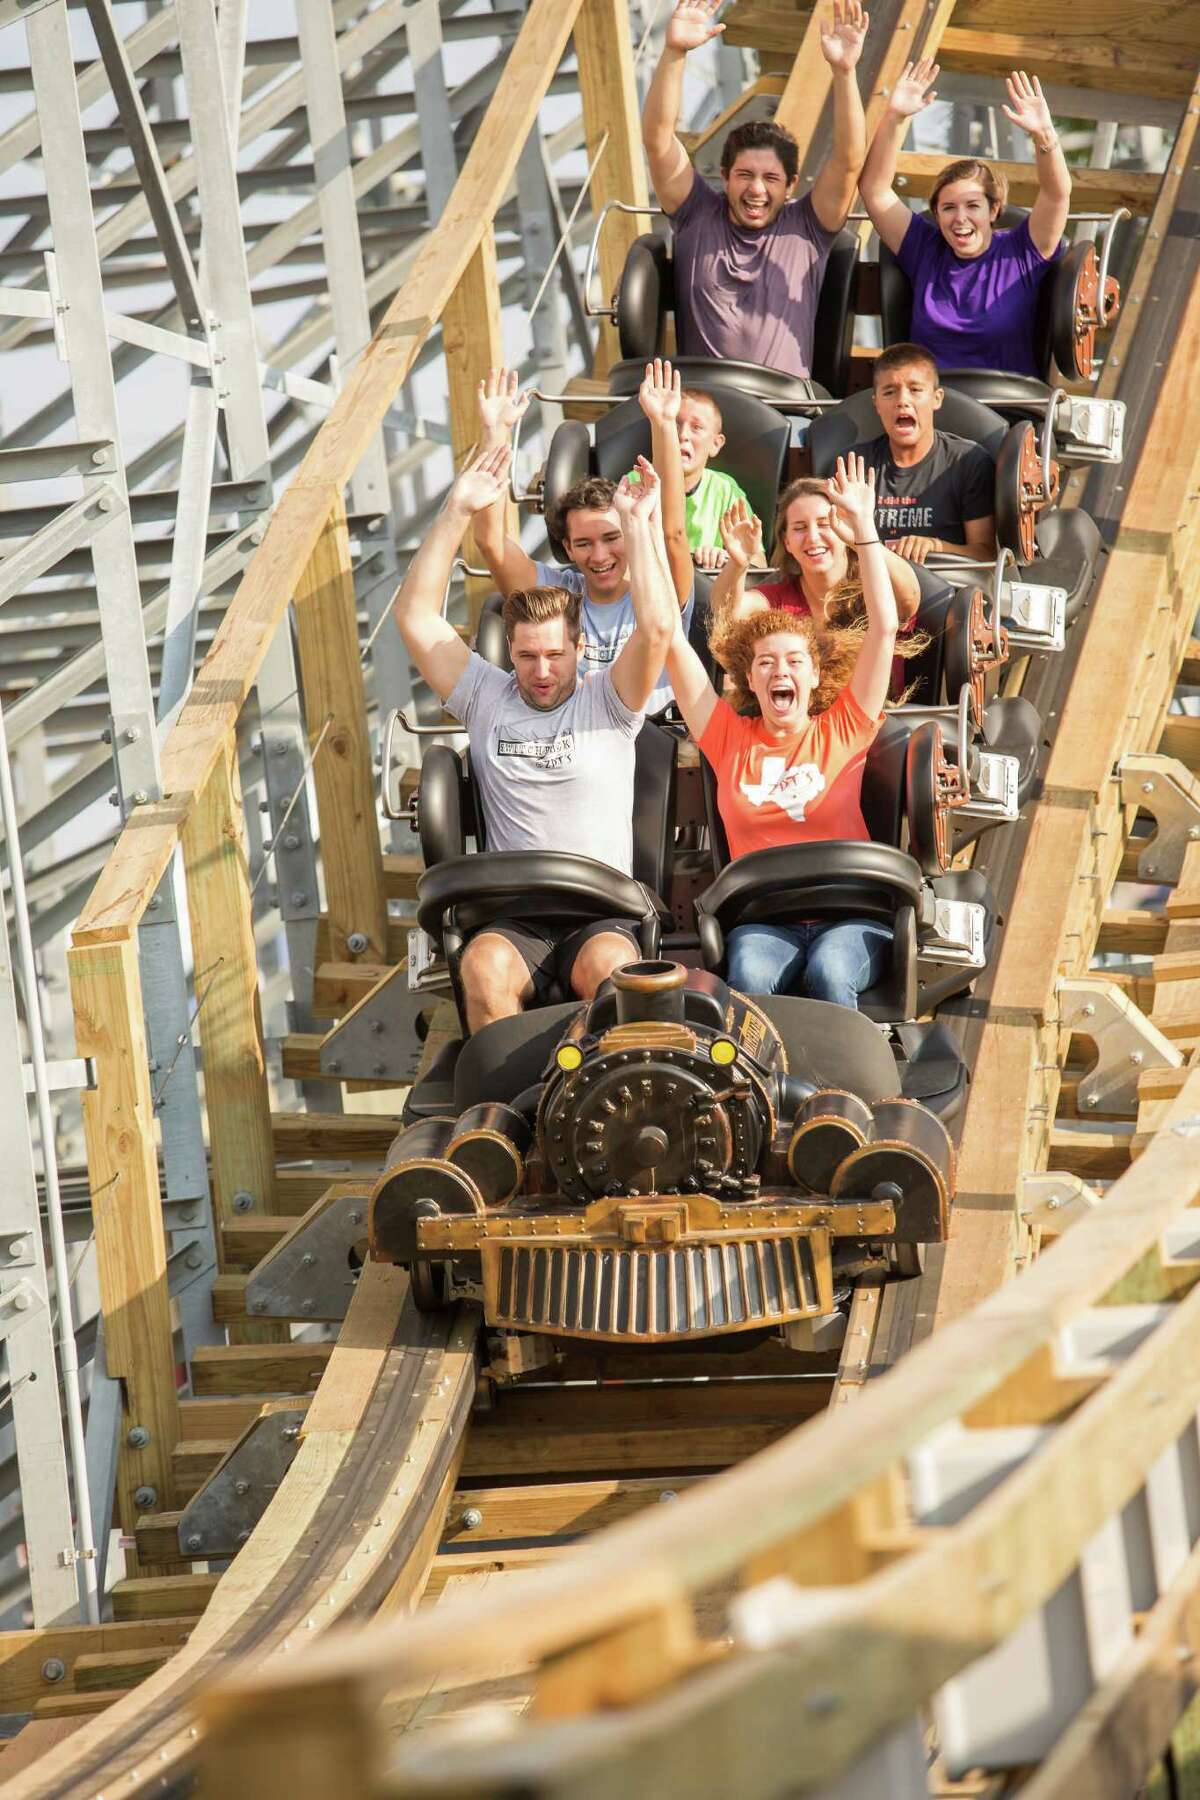 ZDT's Amusement Park in Seguin debuted Switchback, a wooden shuttle roller coaster, in October.